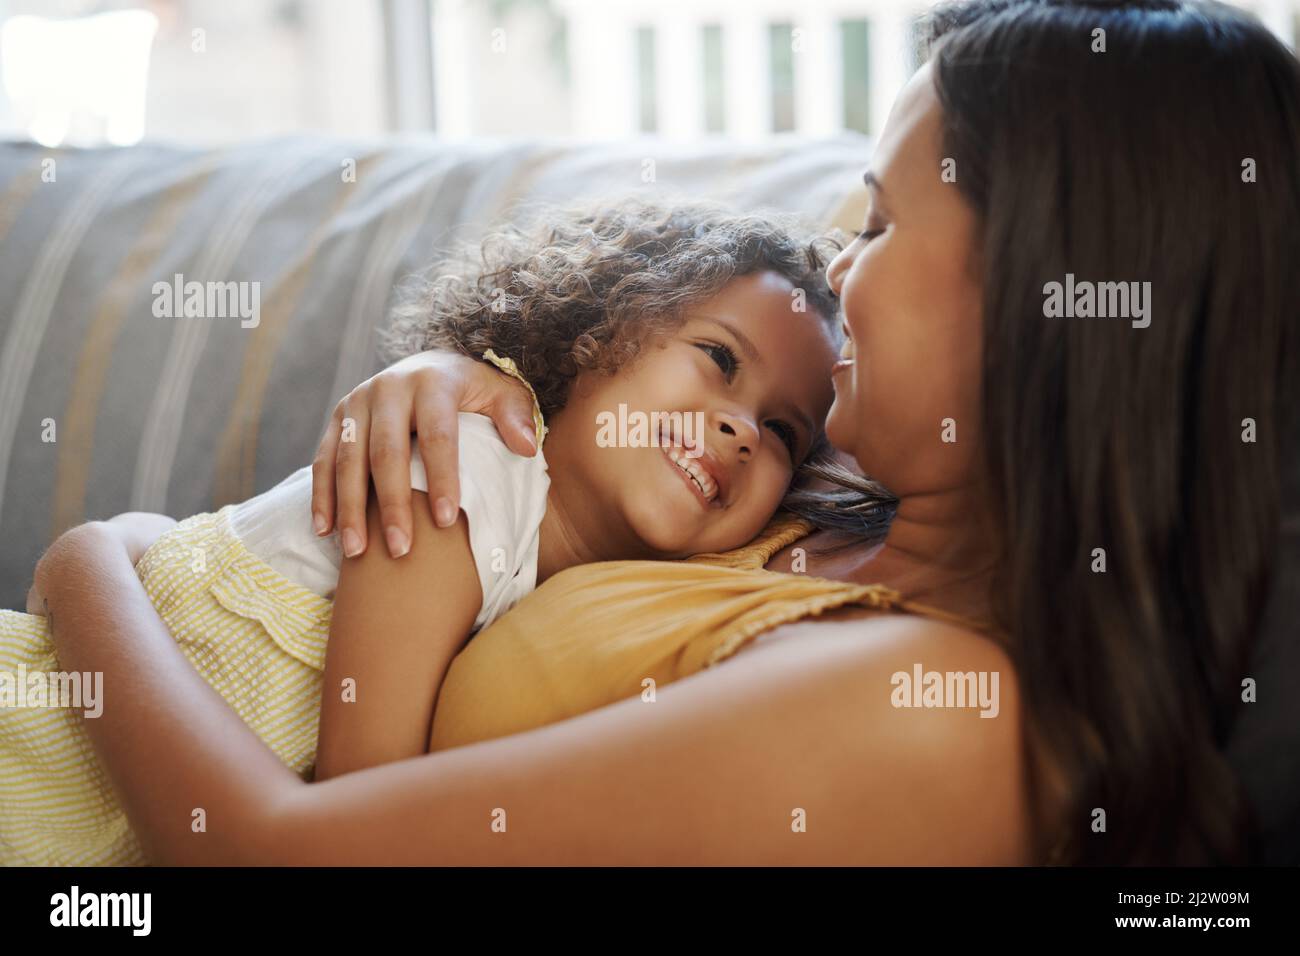 Cherishing these moments with her. Shot of an adorable young girl lying down with her mother on the sofa at home. Stock Photo